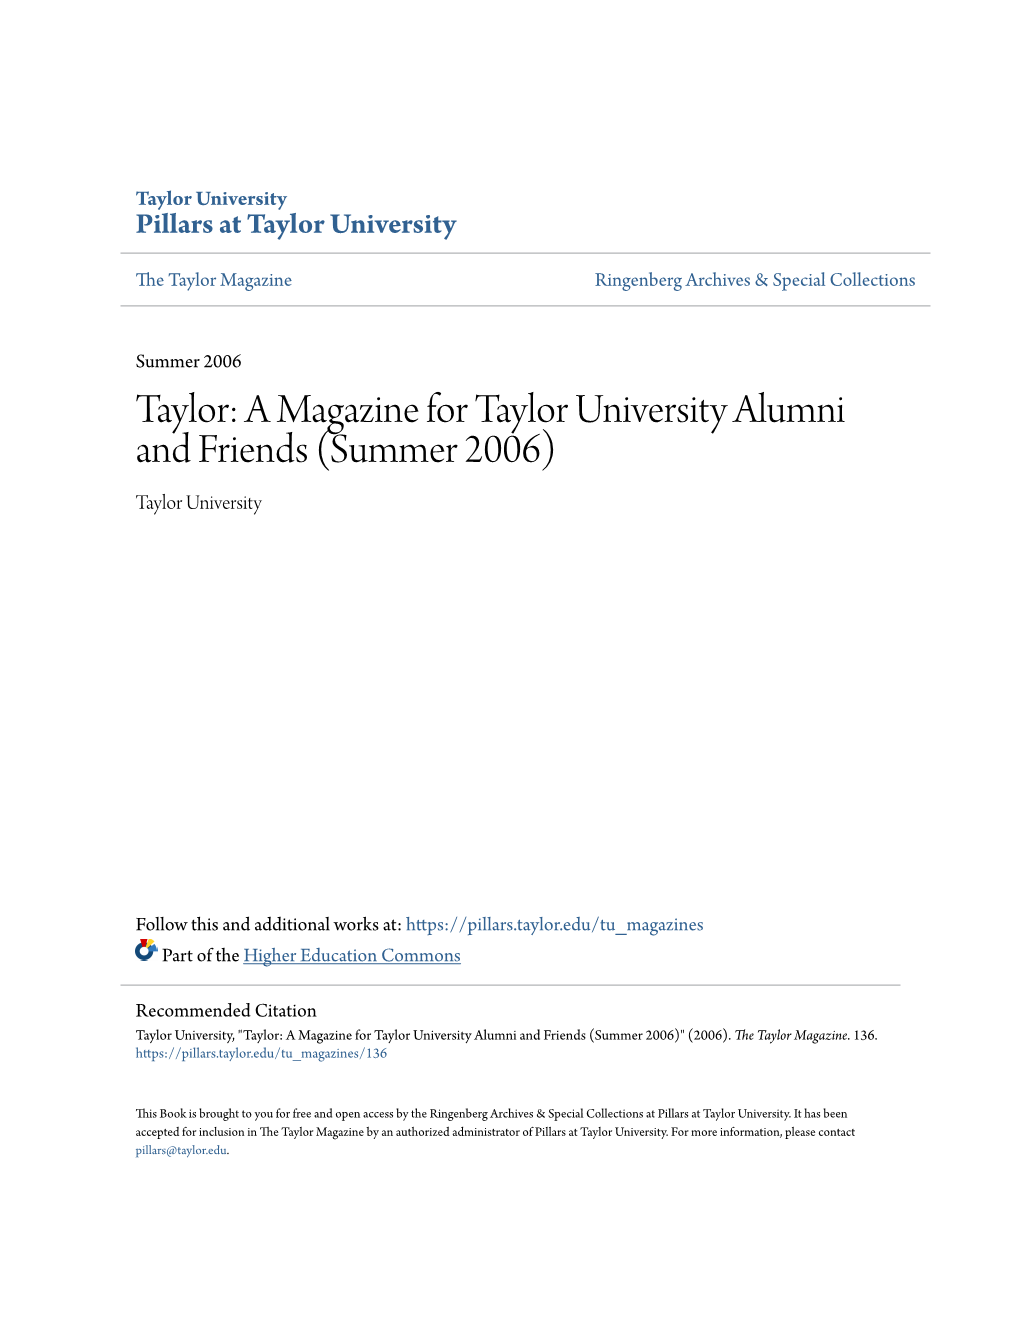 A Magazine for Taylor University Alumni and Friends (Summer 2006) Taylor University